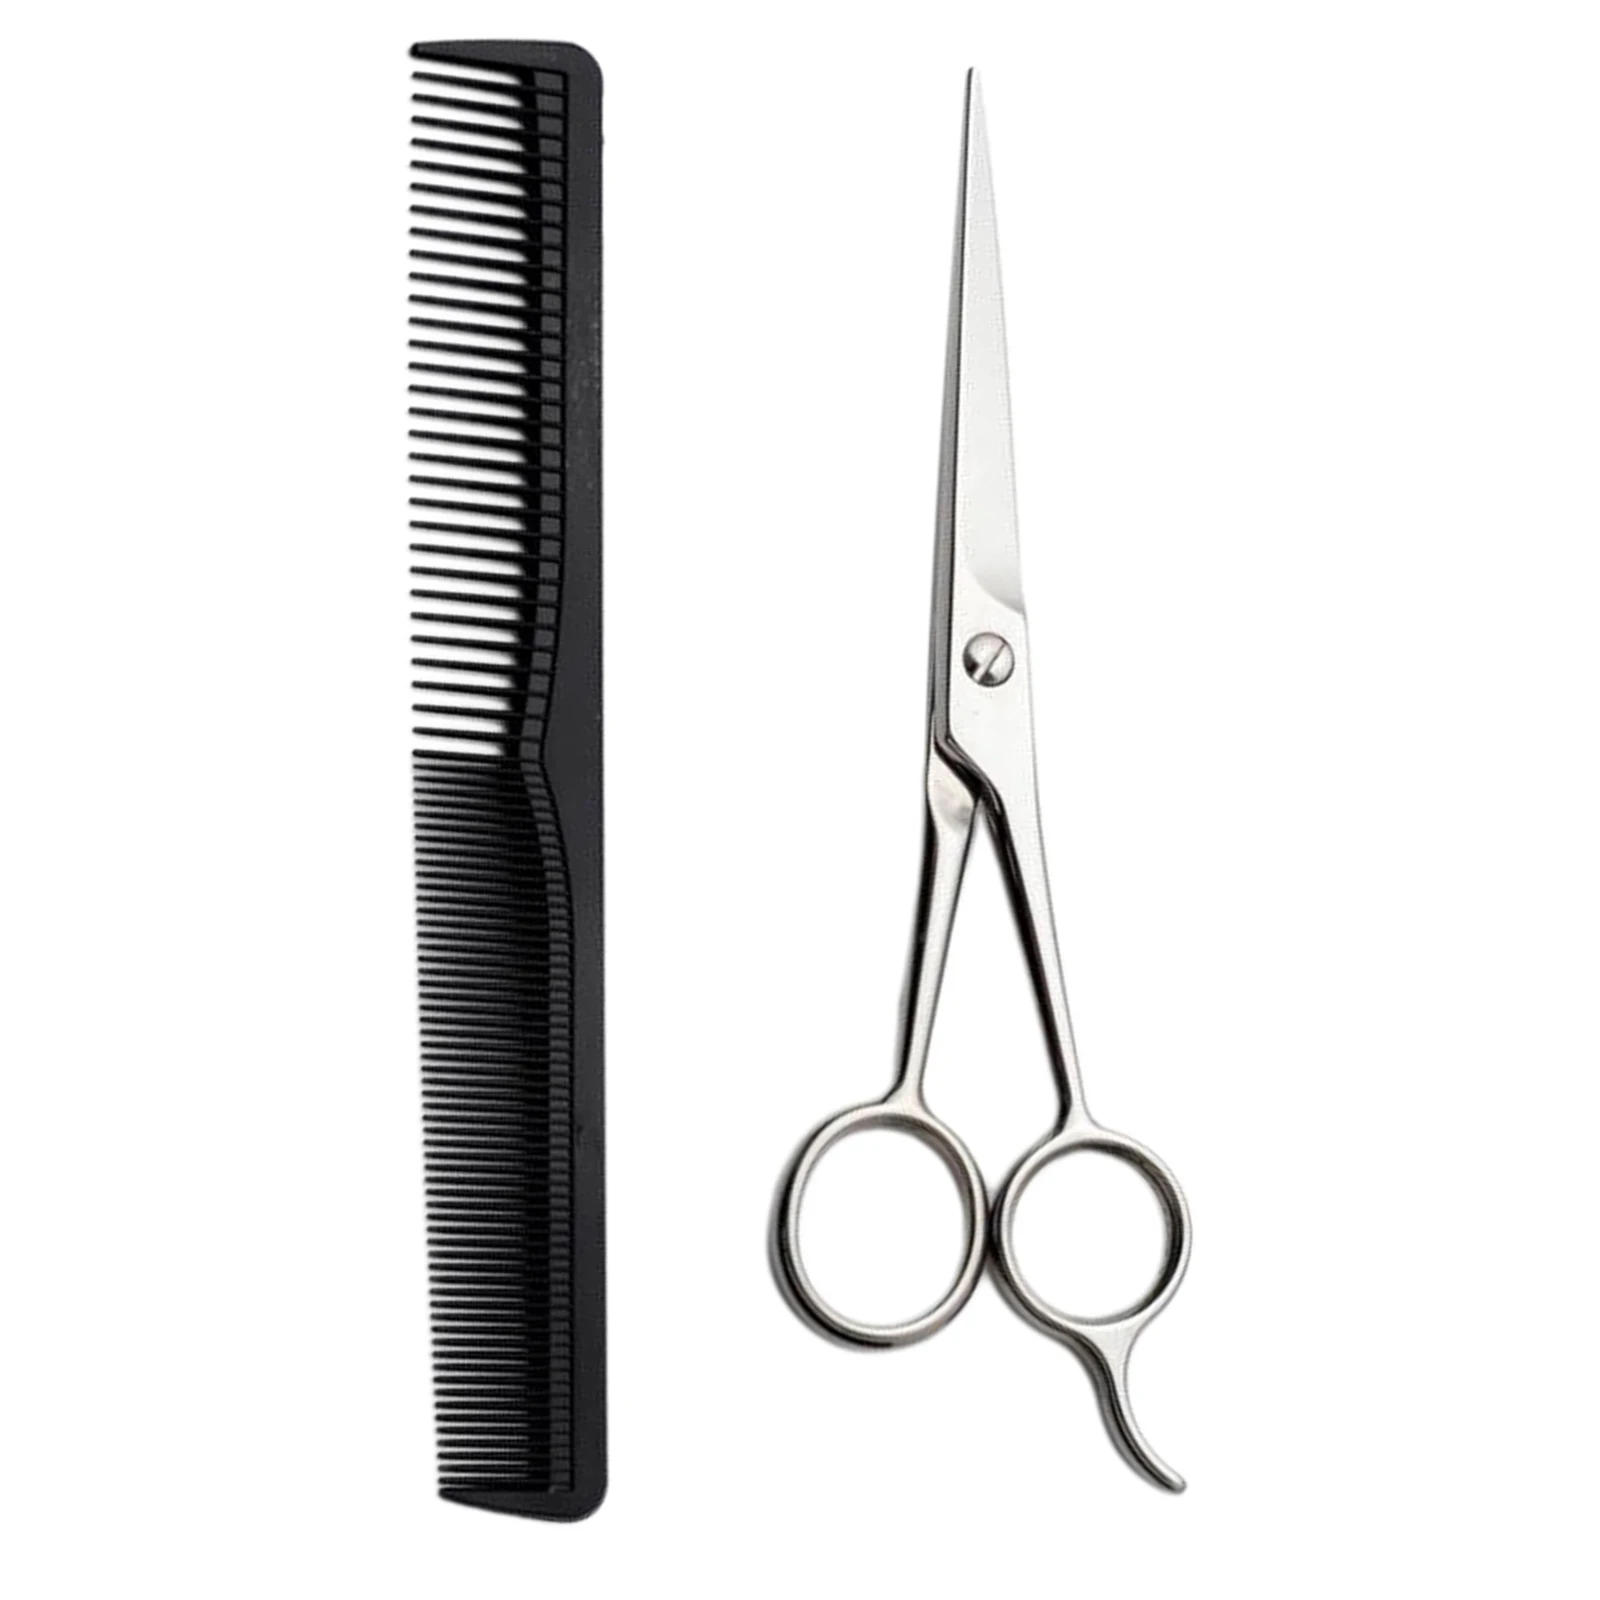 Hair Scissors Cutting Shears Salon Professional Barber Hair Cutting Thinning Hairdressing Styling Tool Hairdressing Comb